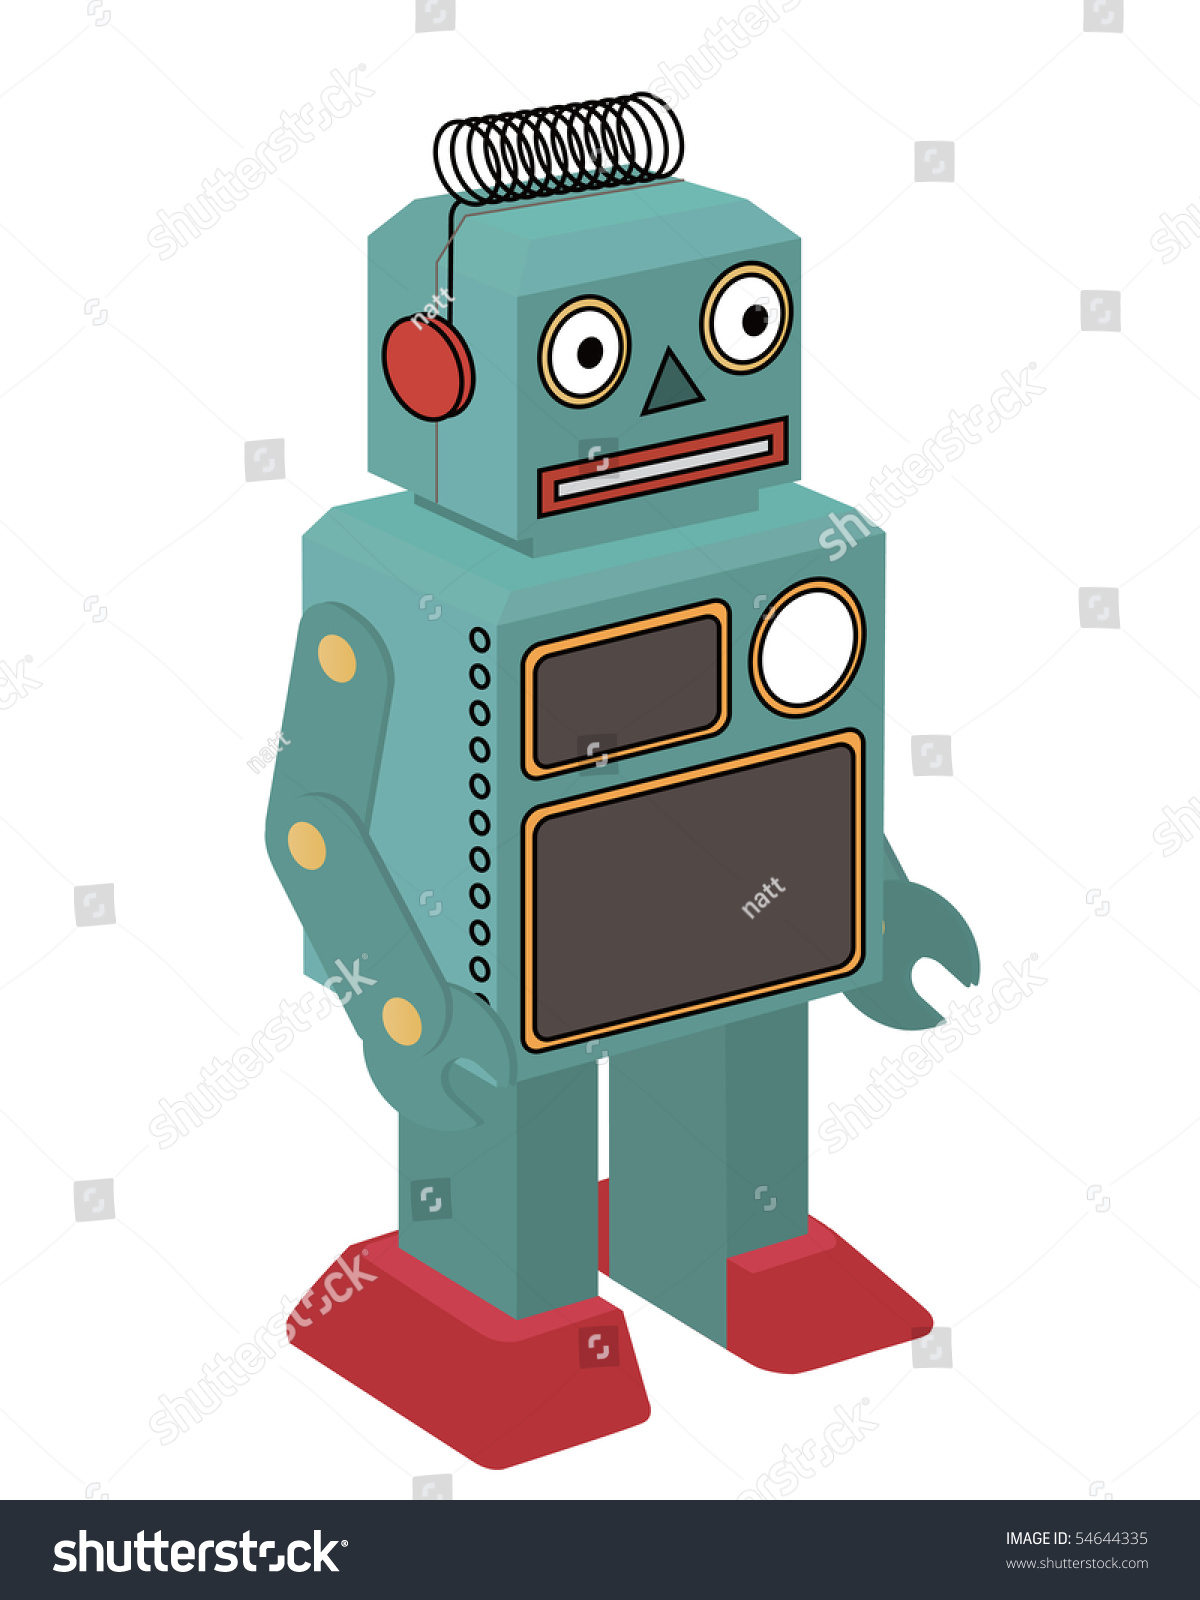 robot toy clipart - photo #39